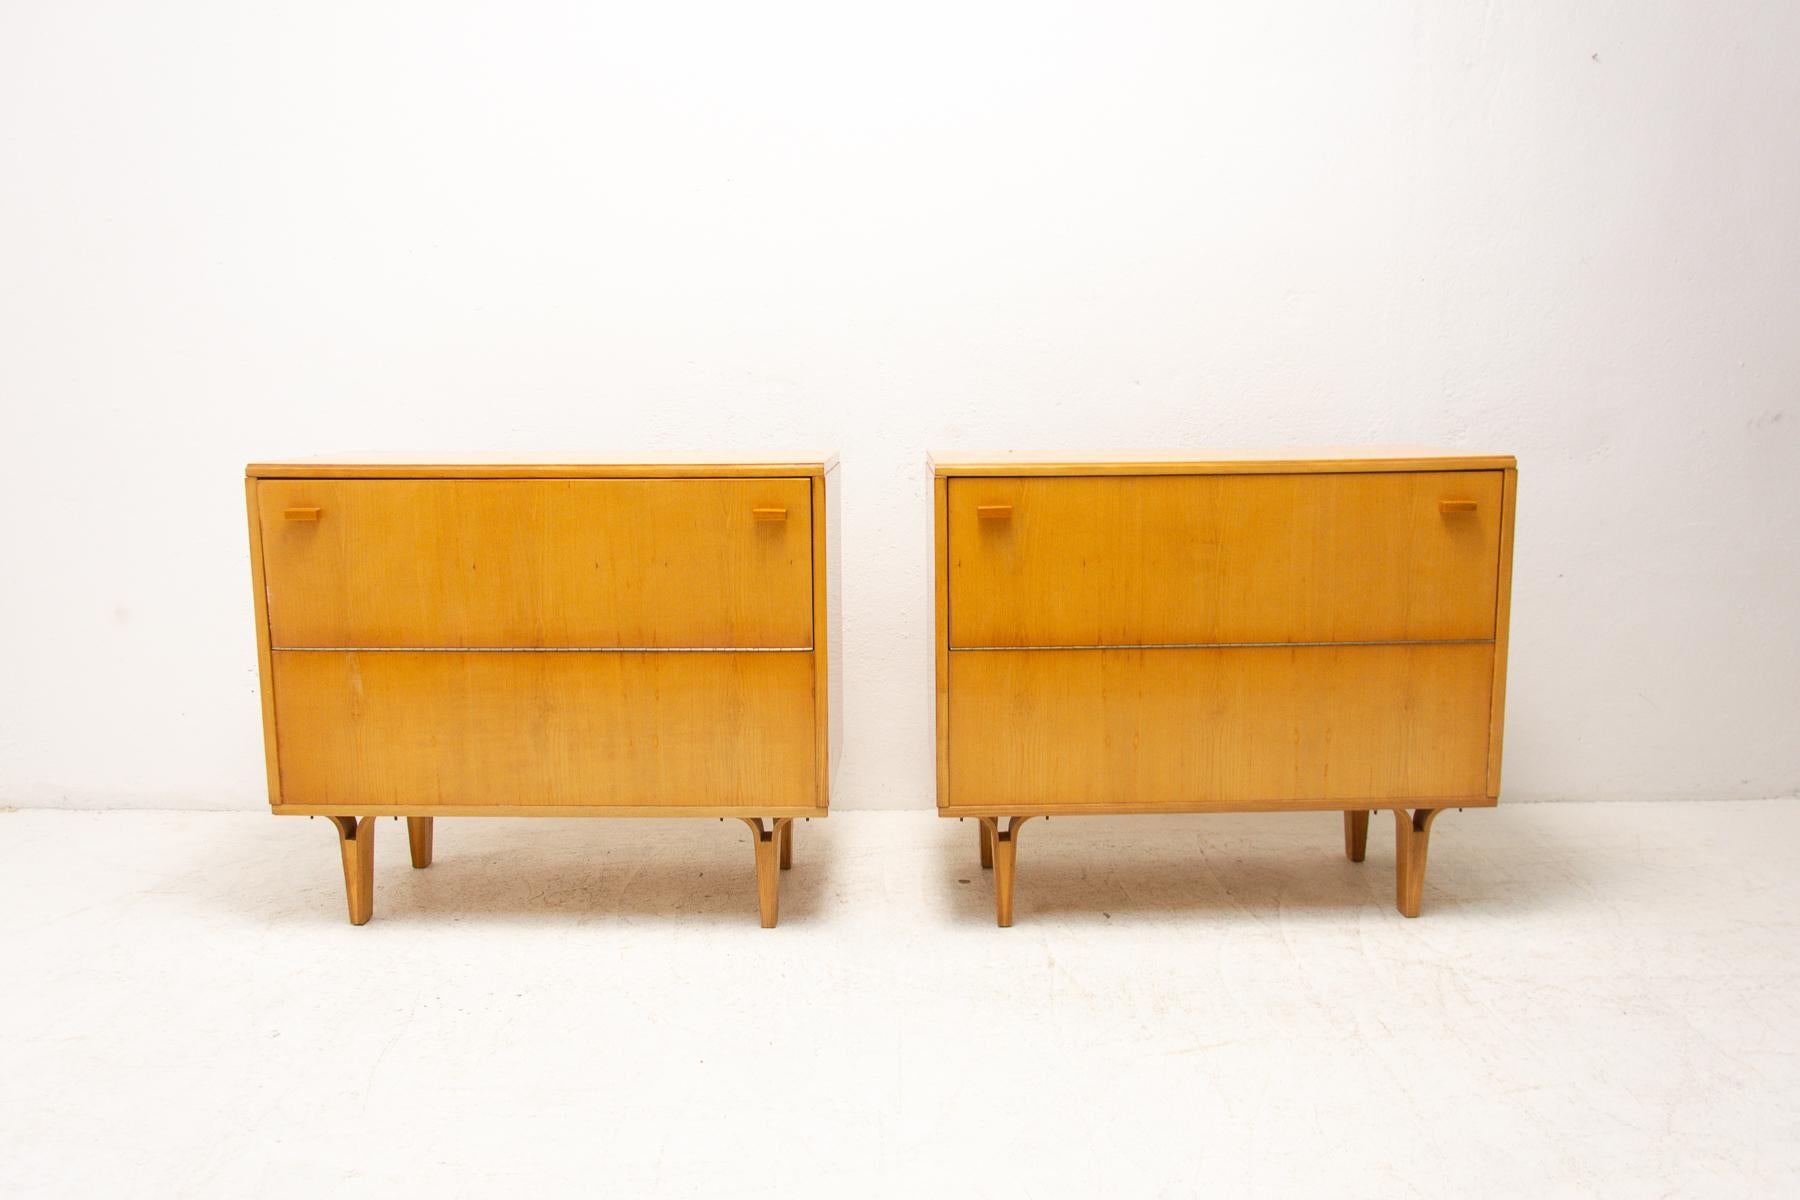 This dresser for bedding was designed by Czechoslovak architect František Mezulánik for Nový Domov company in the former Czechoslovakia in the 1970´s.

It can be also used as a TV stand or small chest of drawers. It´s made of beech wood.

Very